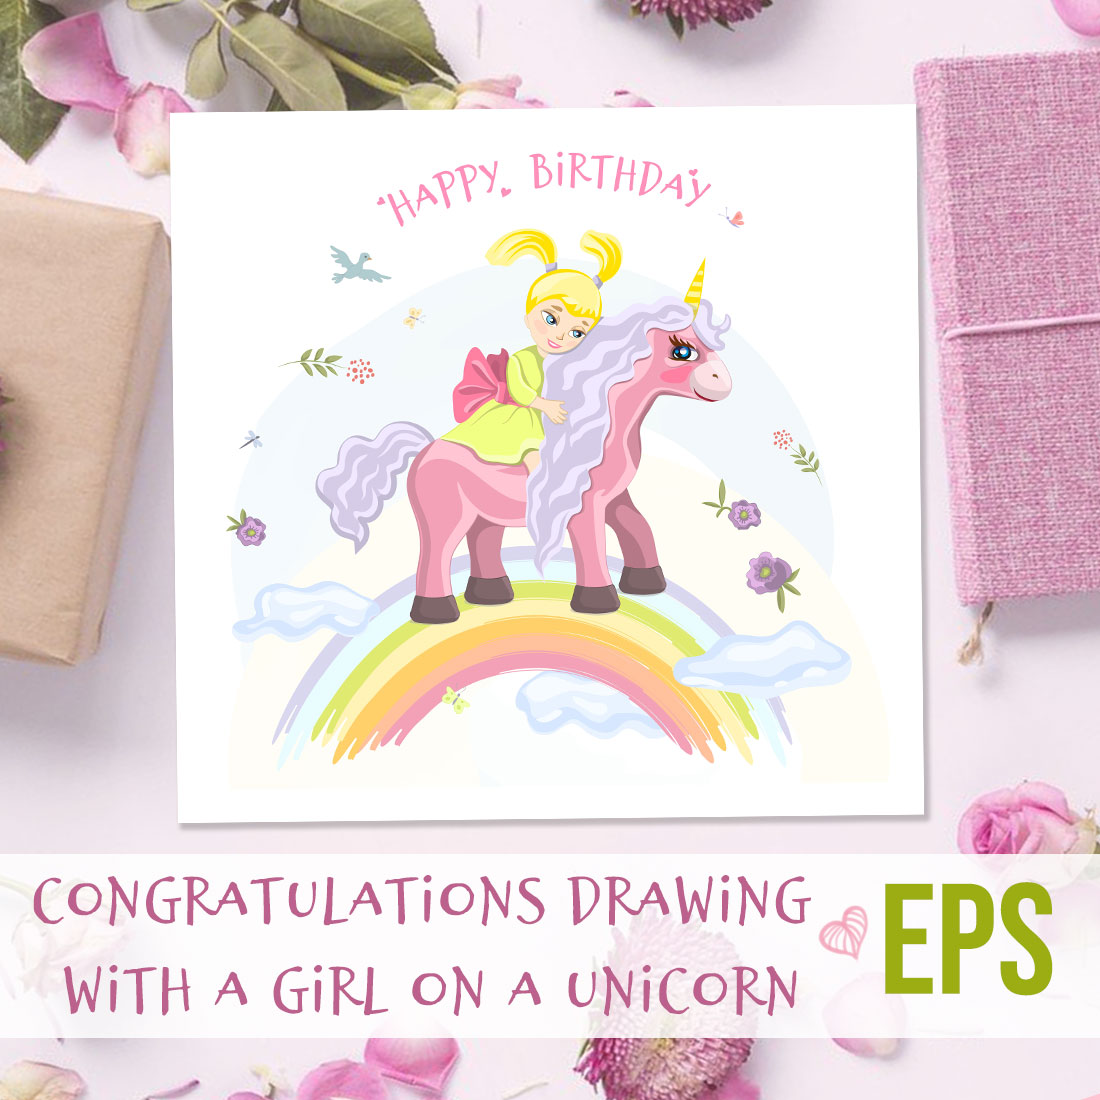 mokup congratulations drawing with a girl on a unicorn